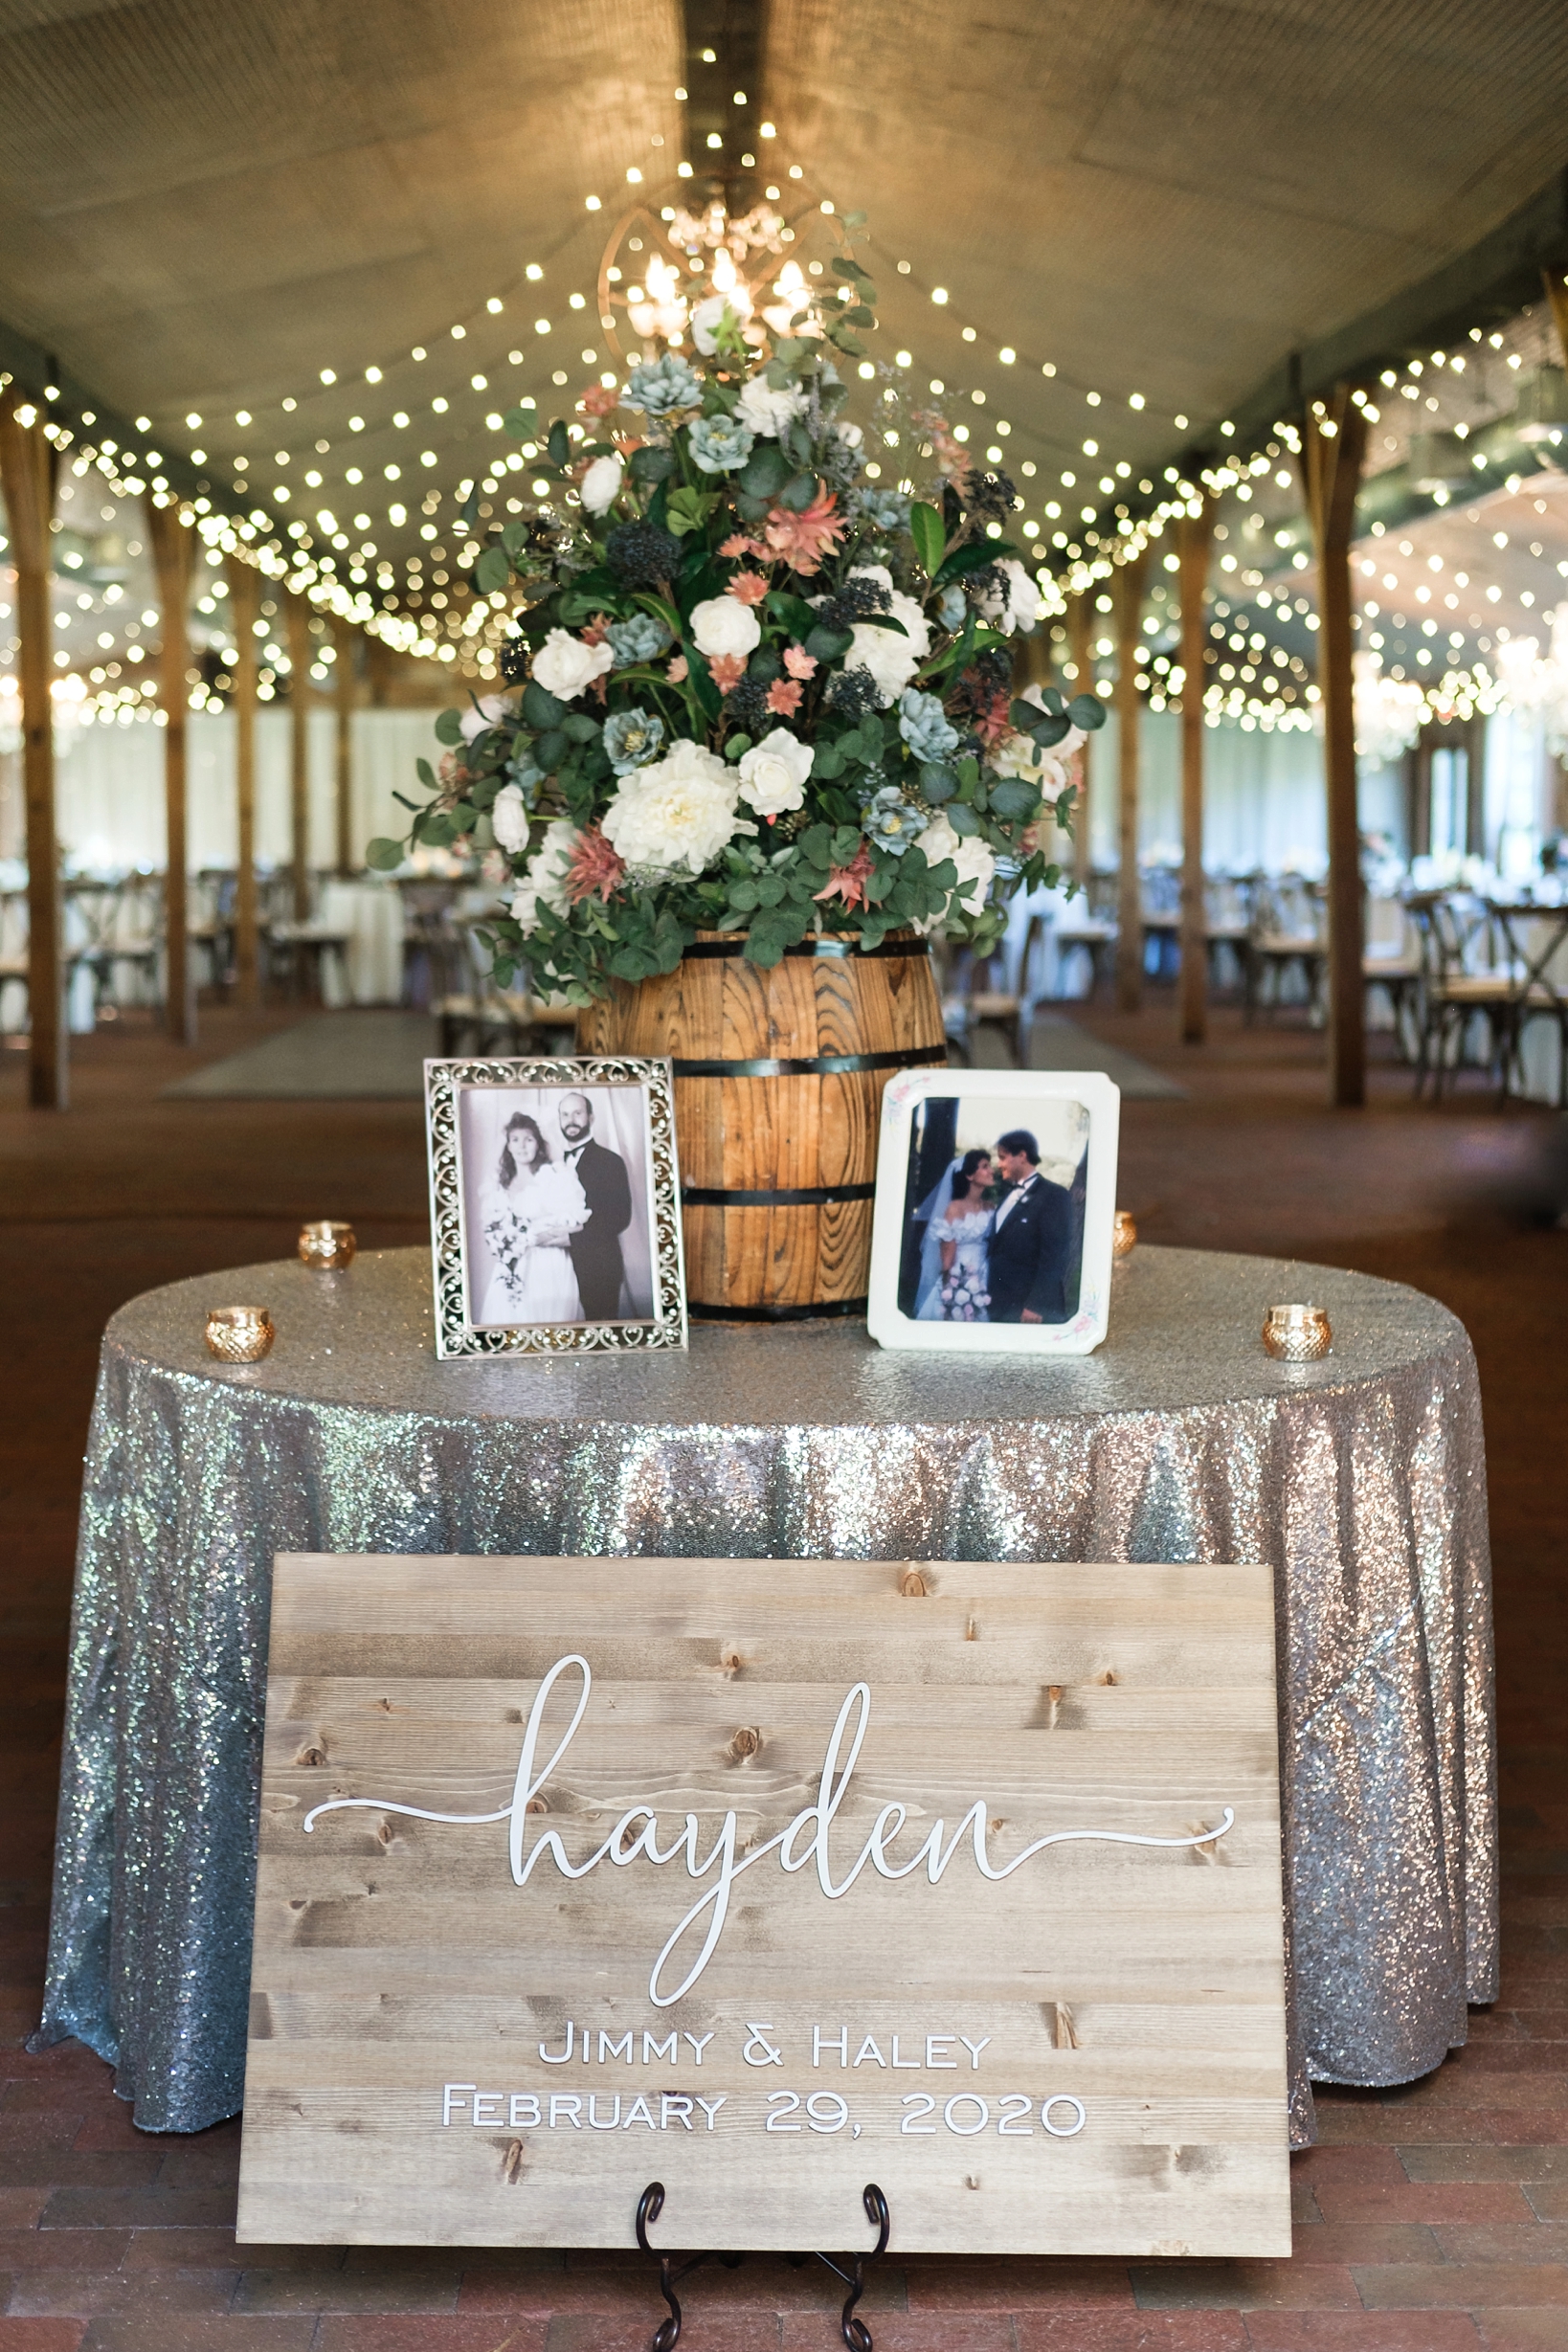 Welcome table greets guests with large florals, photos of the family and a large wooden sign